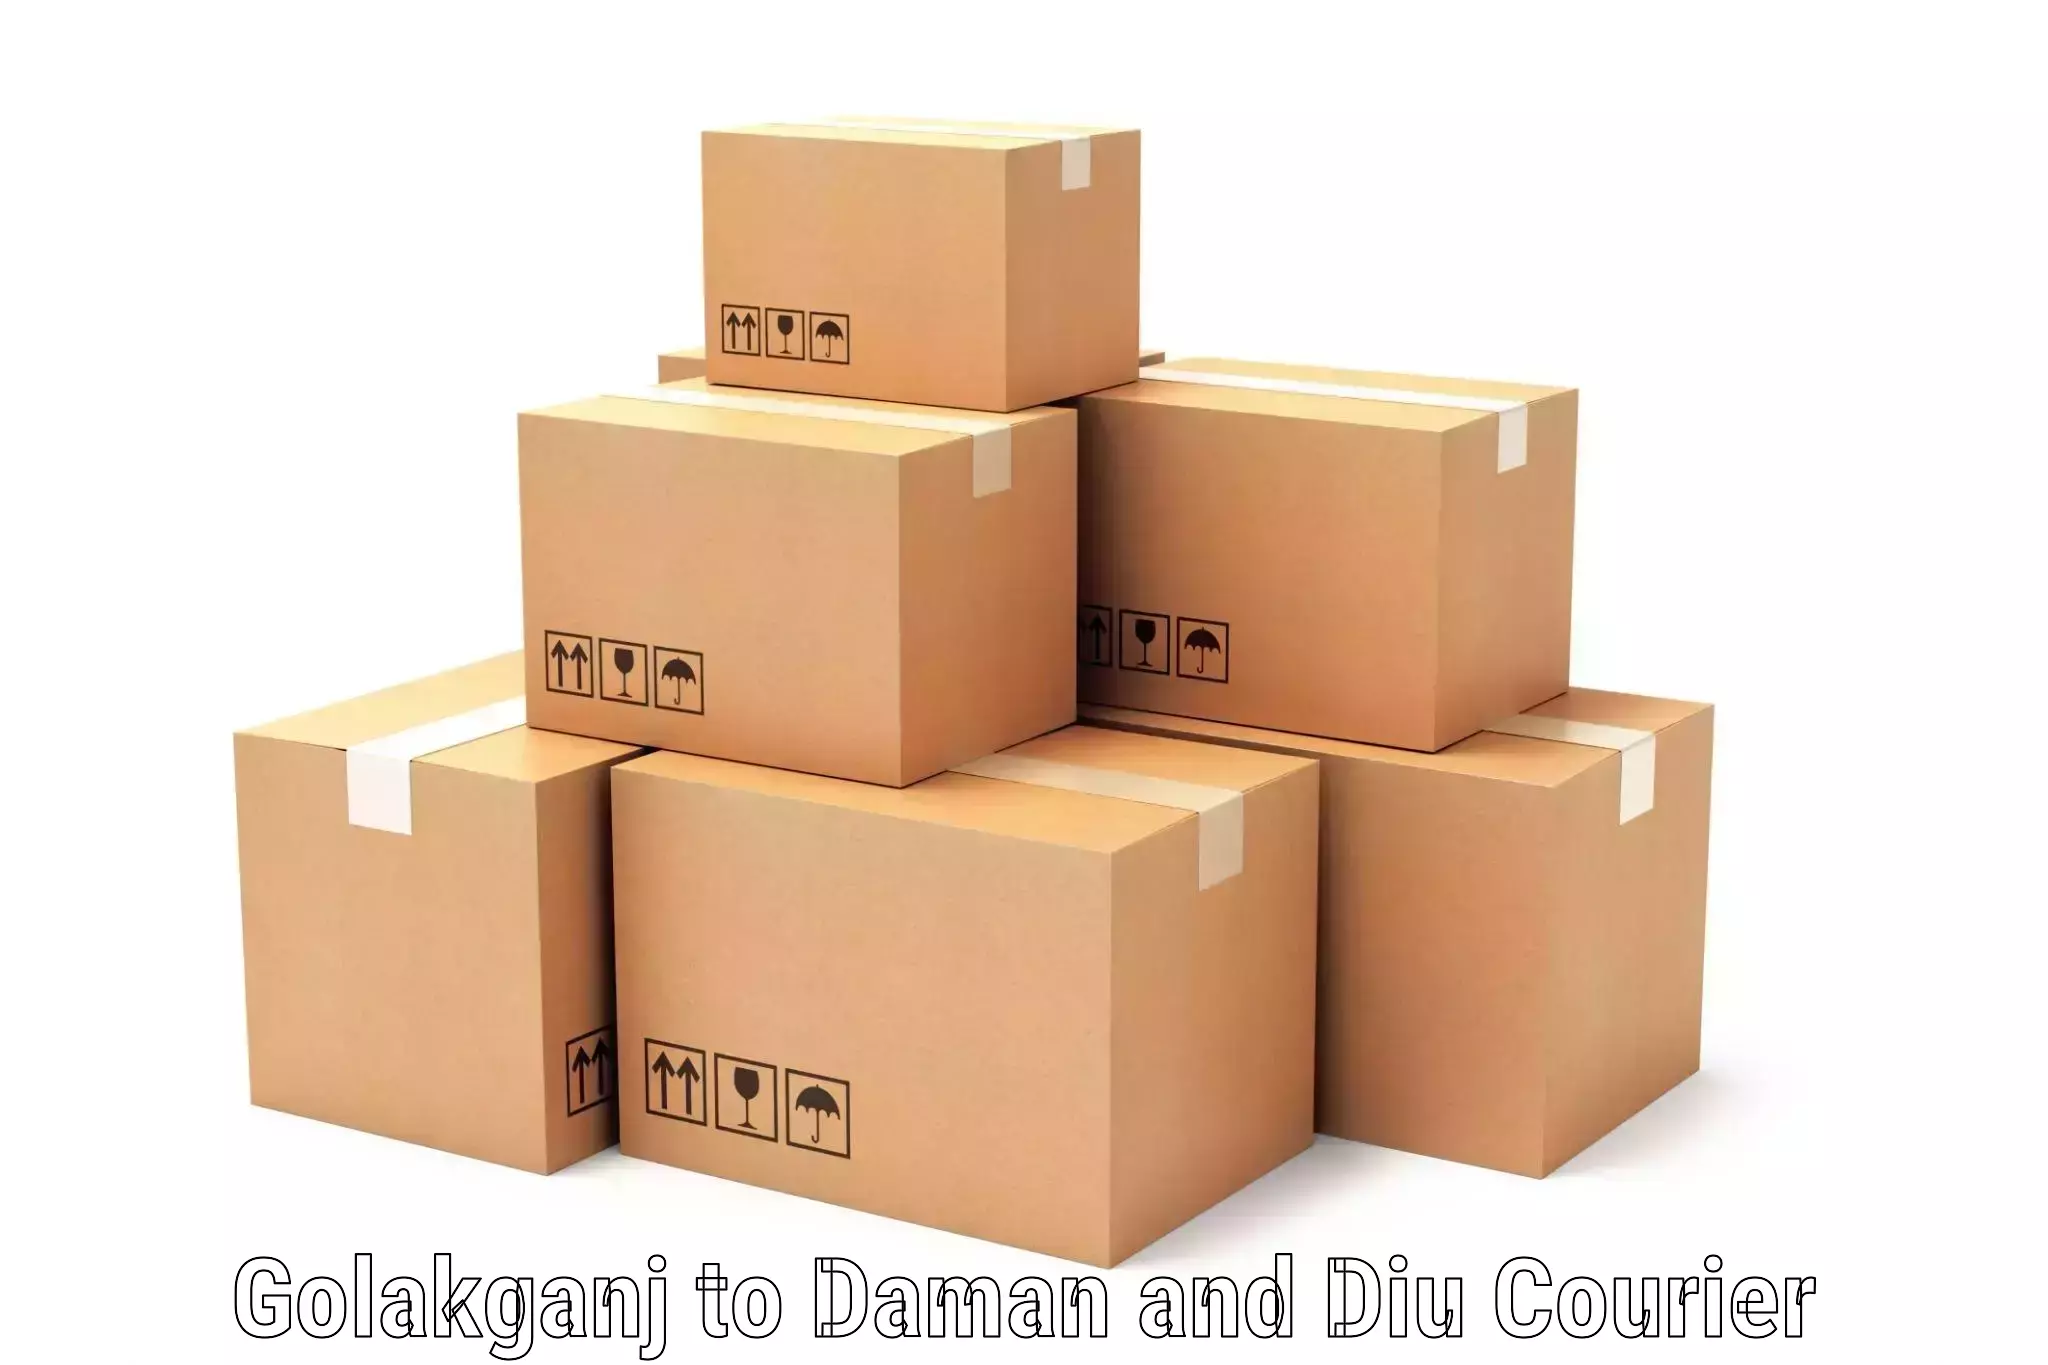 Full-service courier options Golakganj to Daman and Diu